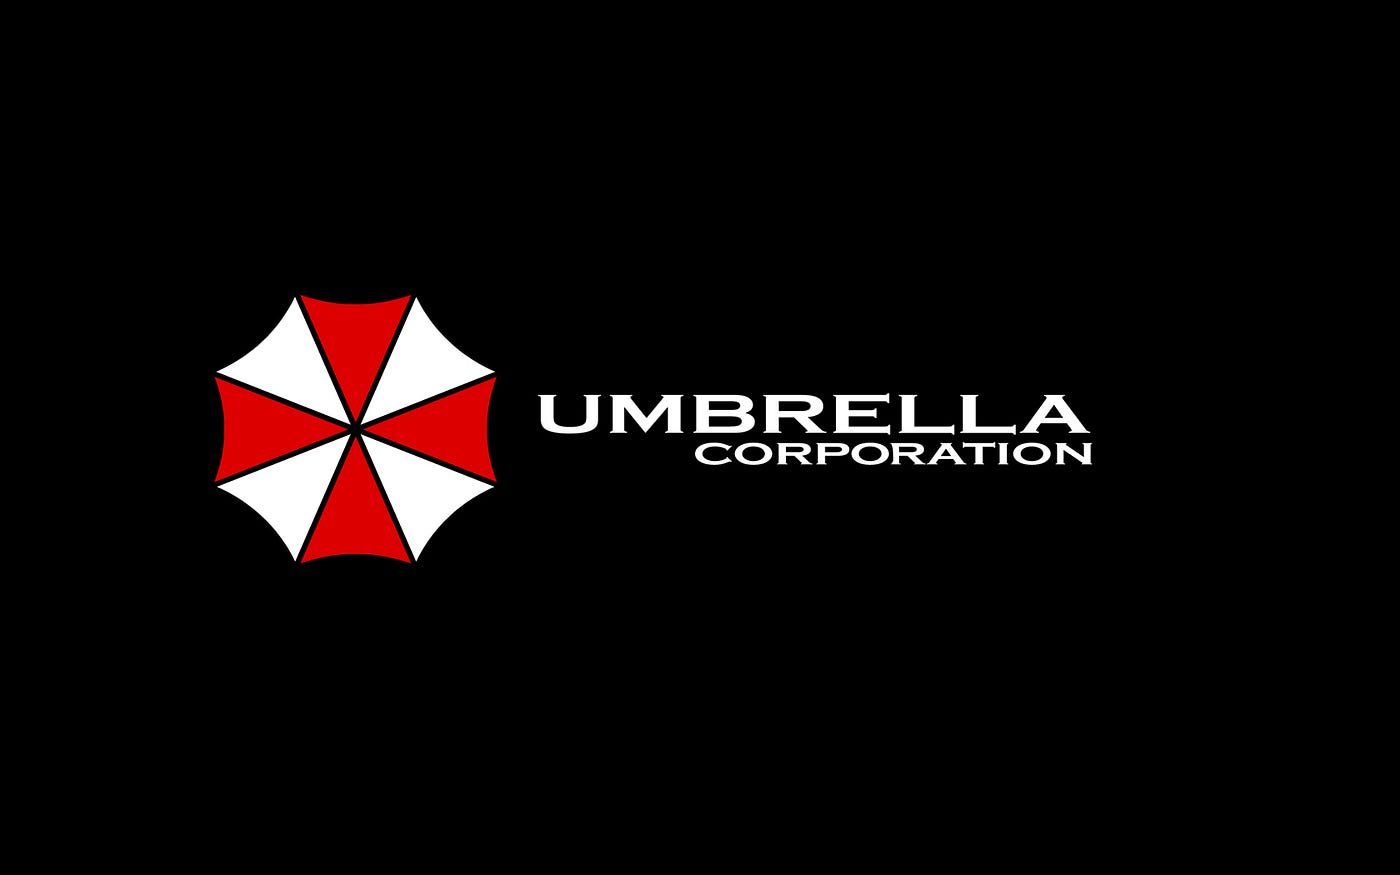 Umbrella Corporation to Reopen, Bring Jobs to the USA, by Colin Roy, Silent Protagonist